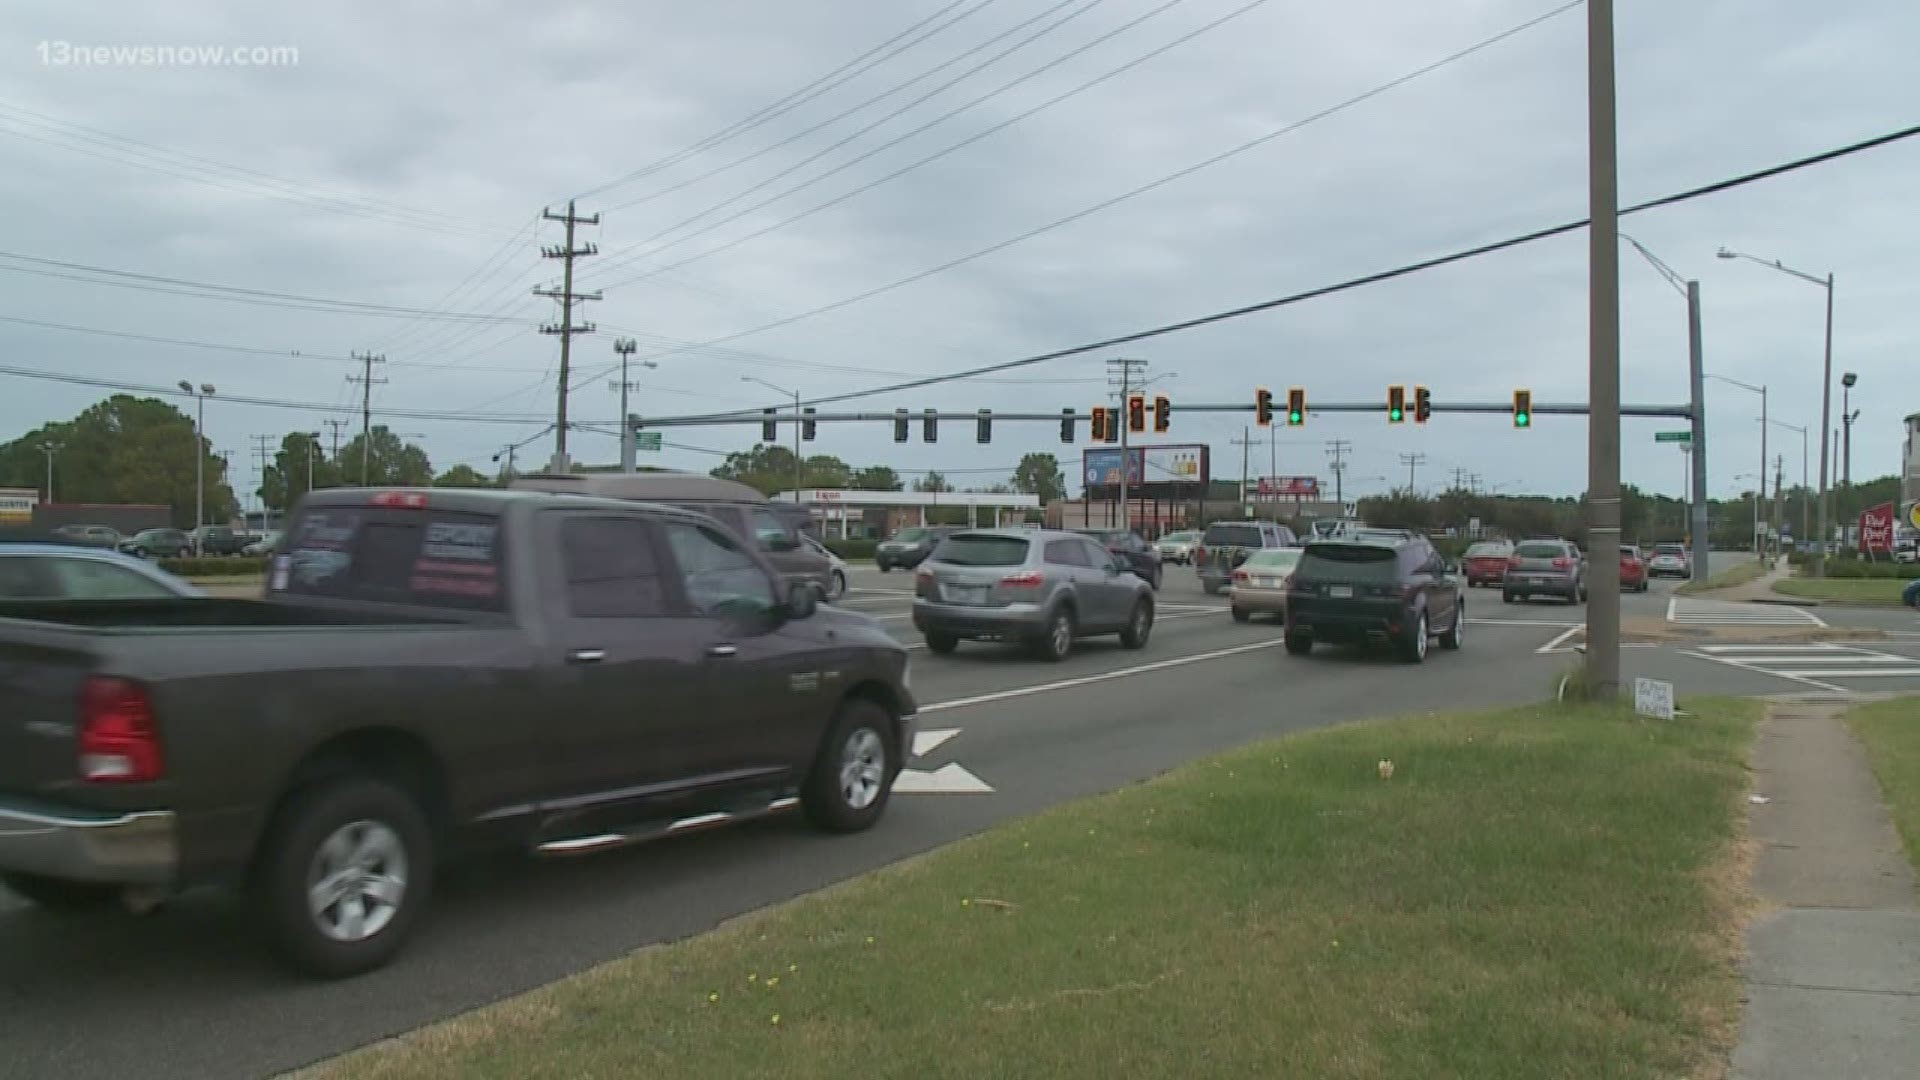 Virginia Beach police said three people have minor injuries while one person has serious injuries. One of the drivers was cited for an unsafe lane change.